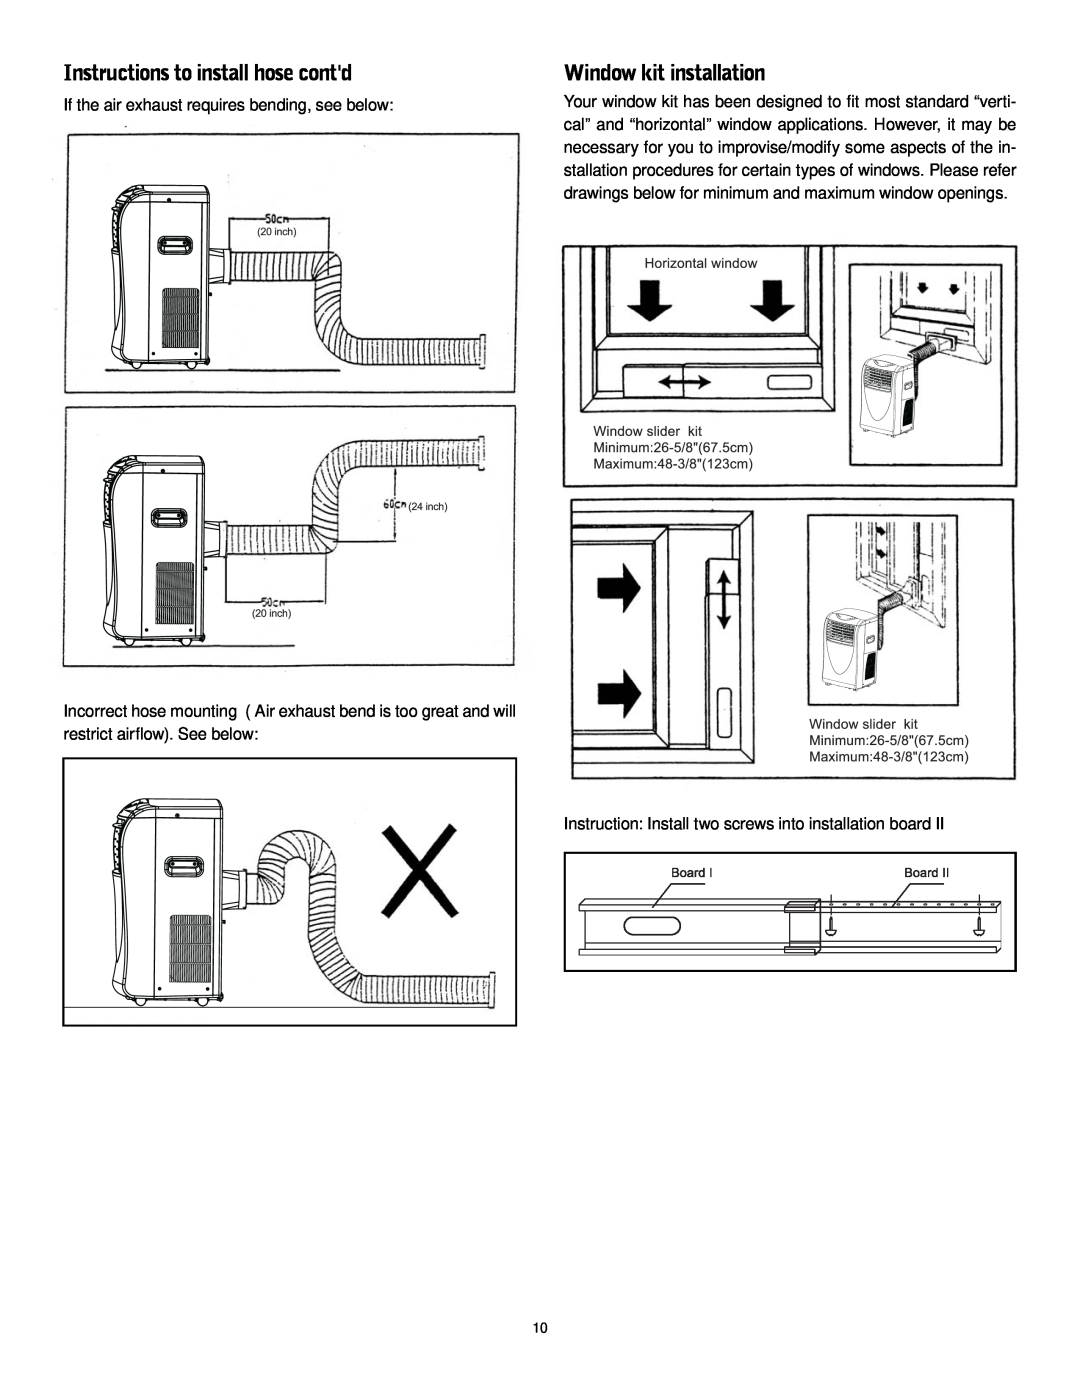 Friedrich P-12 operation manual Instructions to install hose contd, Window kit installation 